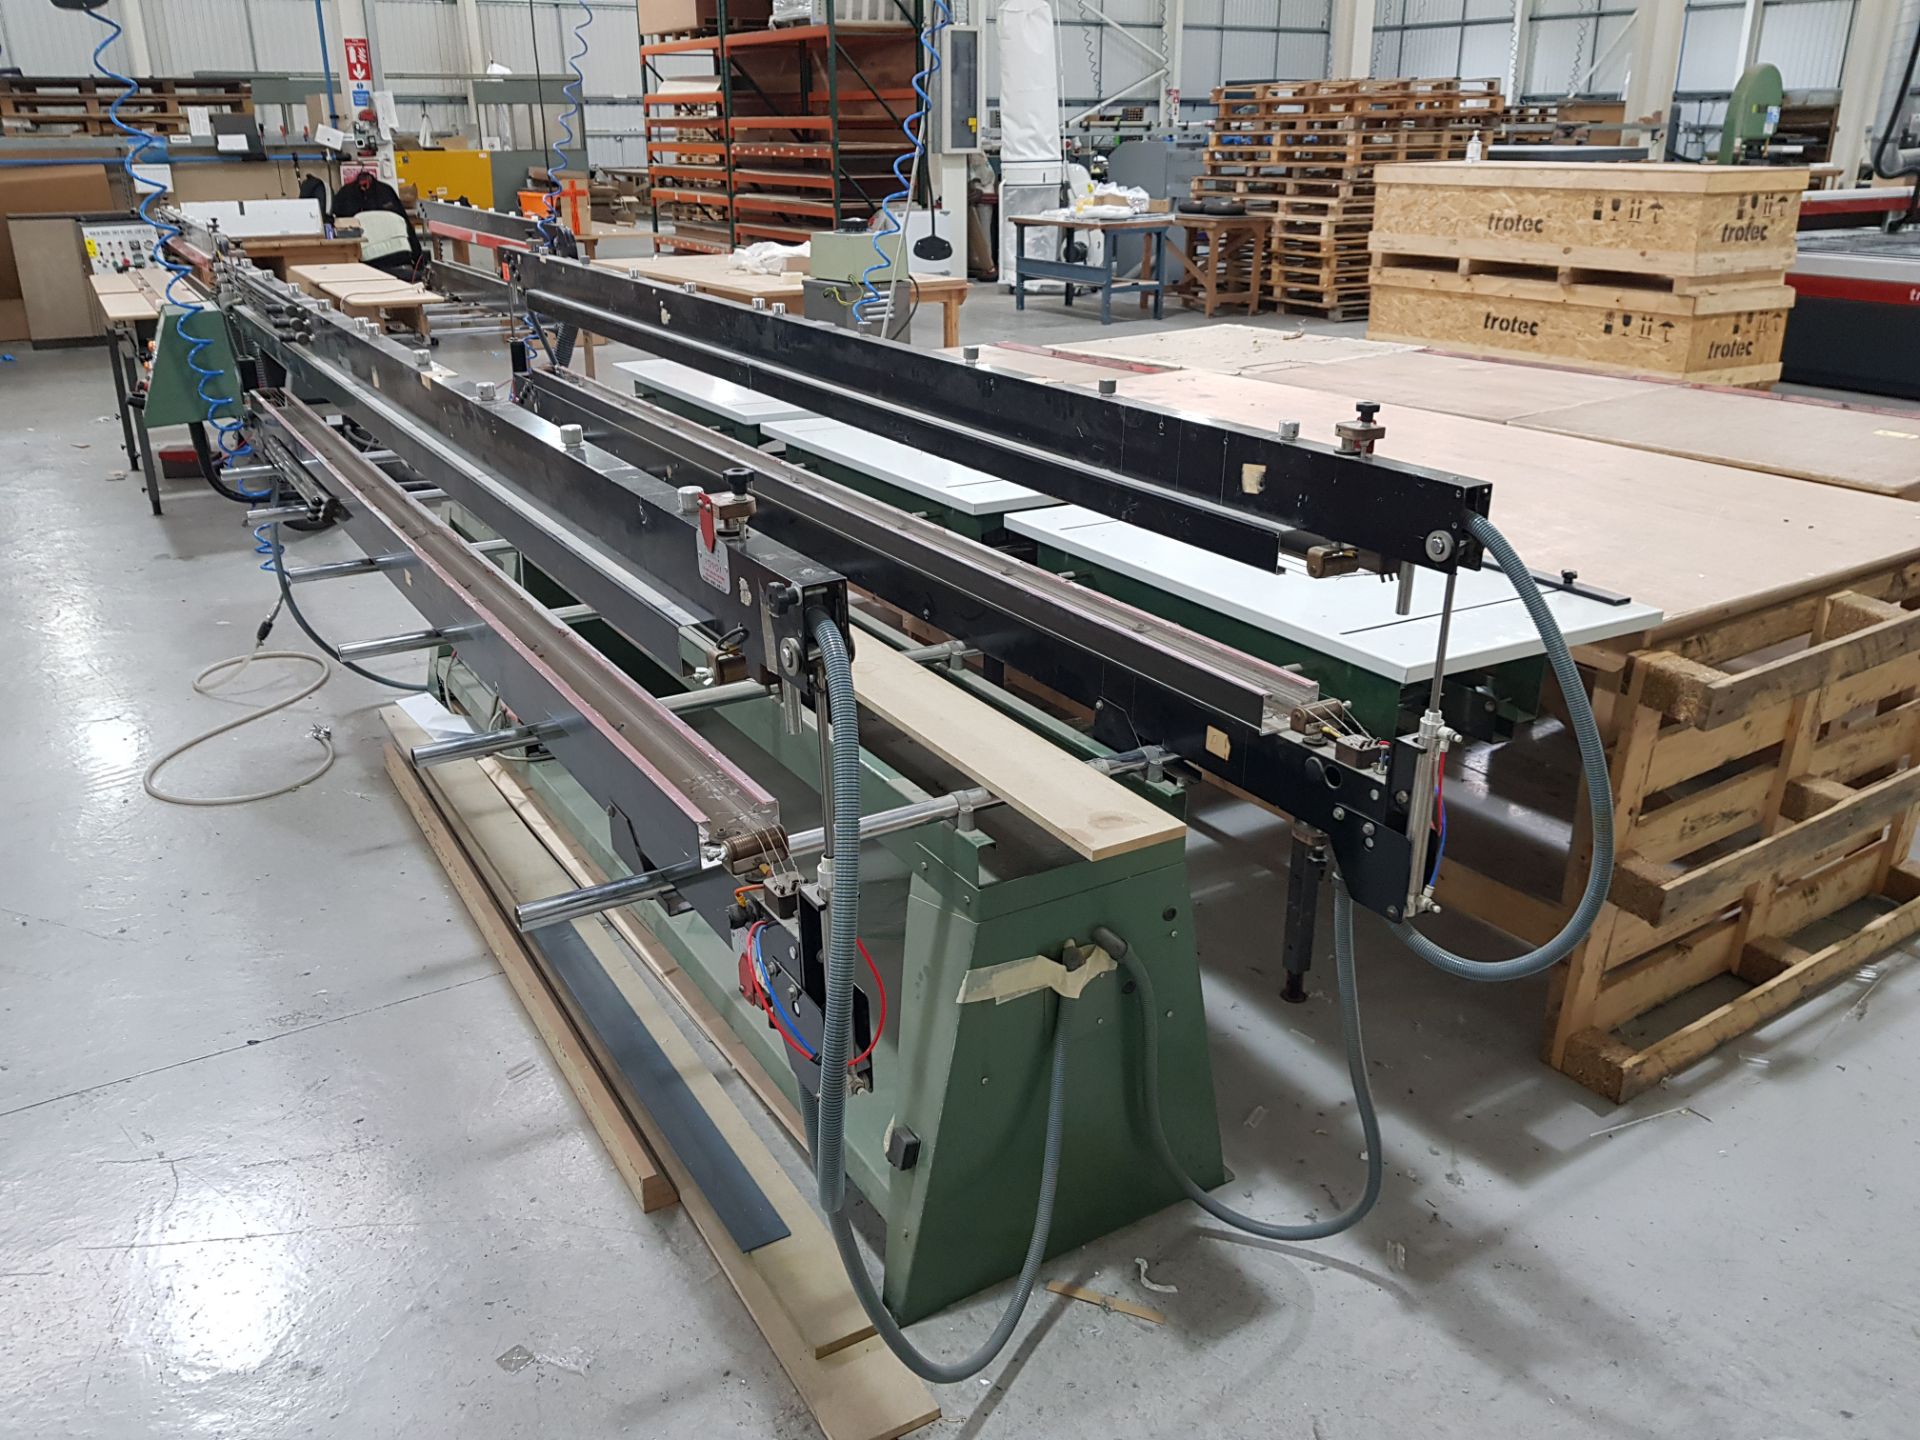 1 X THERMOBEND 3000 WIRE STRIP HEATER - CR CLARKE - SN 300007 - 240 V - MODEL - 3000 D (ASSETS - Image 3 of 7